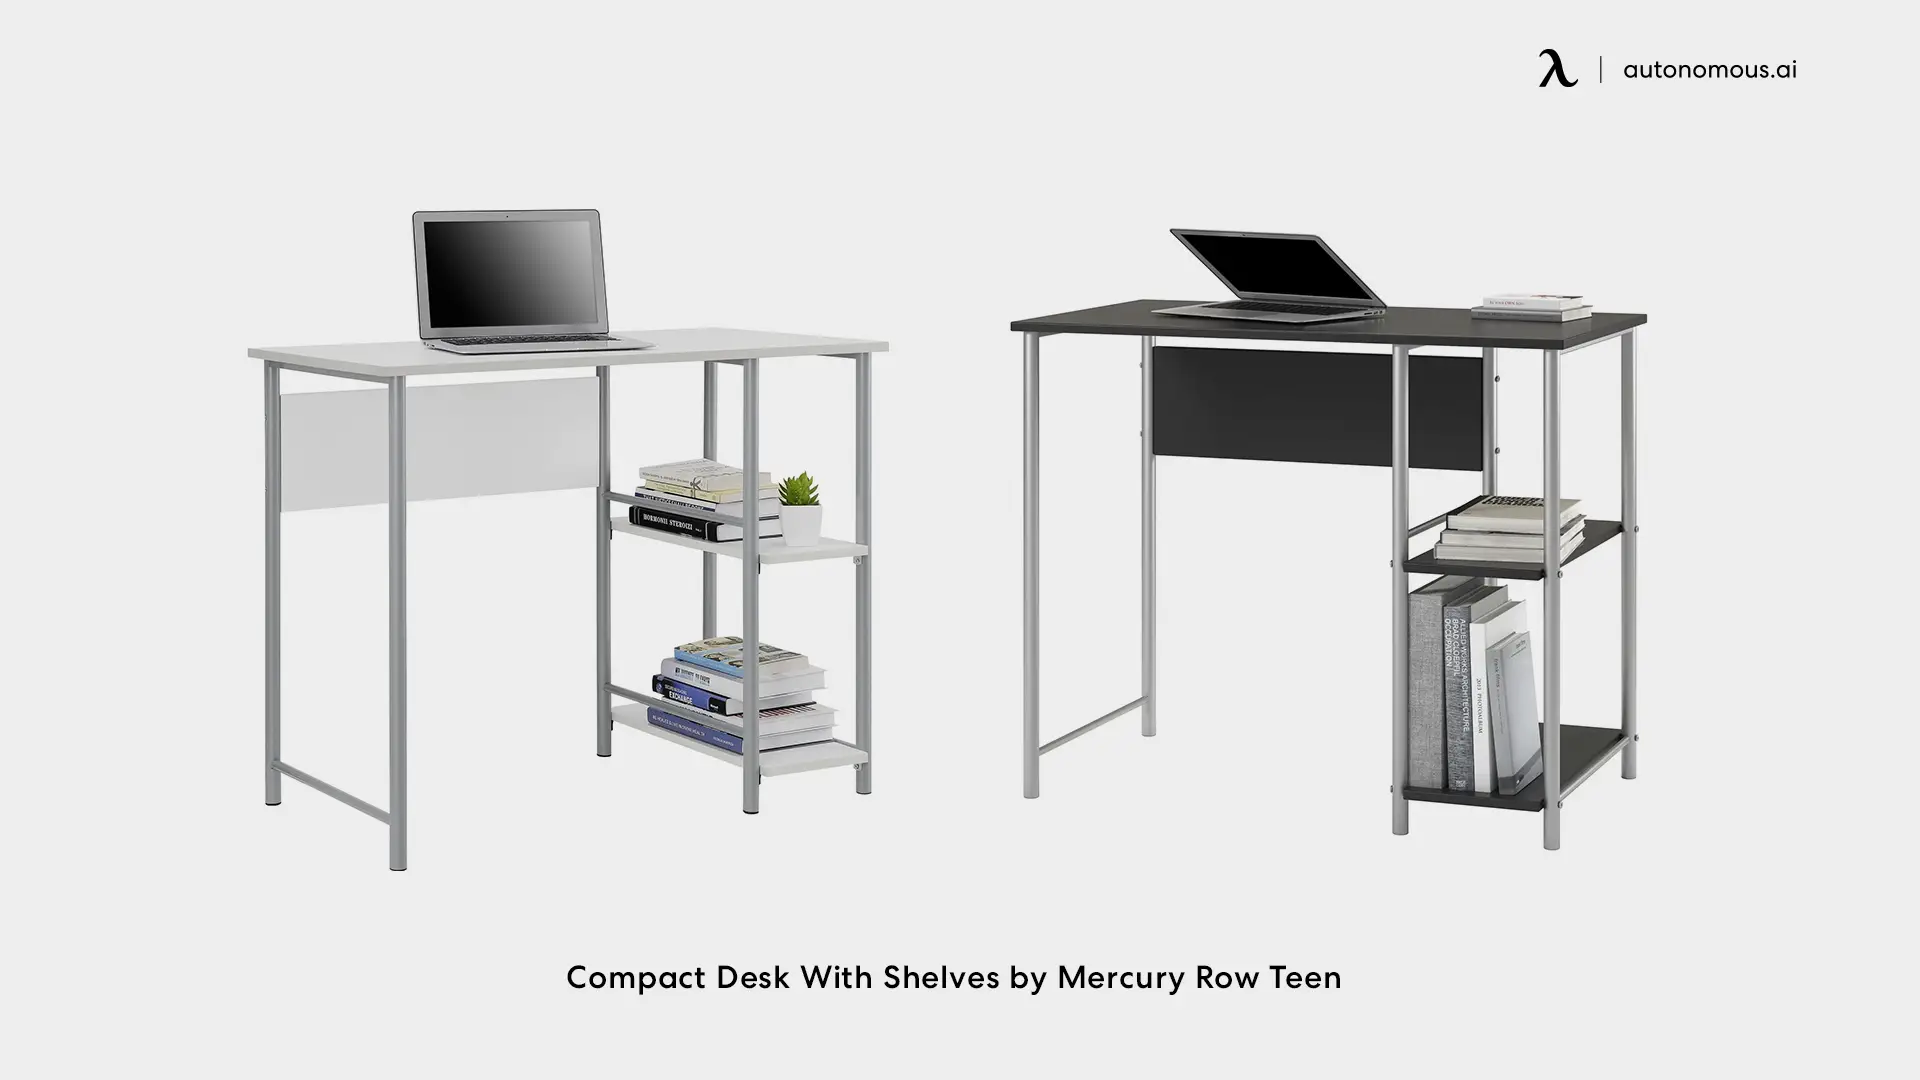 Compact Desk With Shelves by Mercury Row Teen